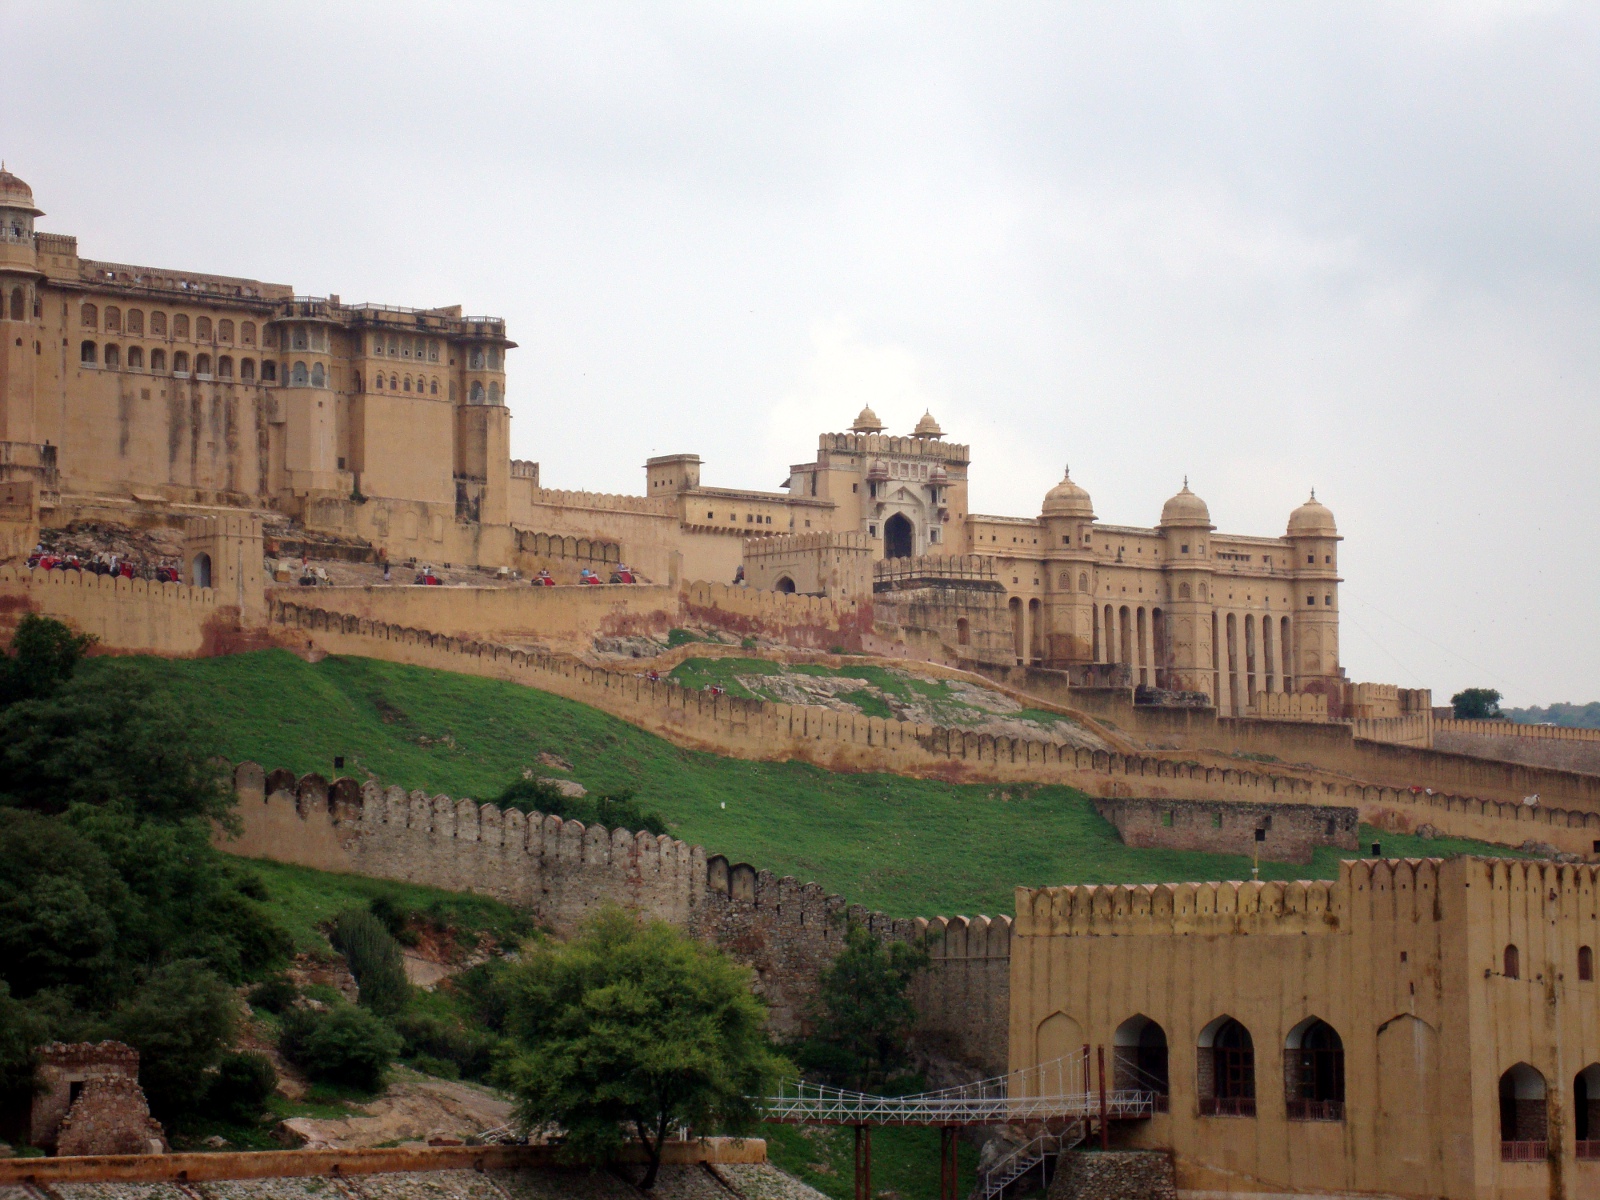 Amber Fort, a Rajput palace outside of Jaipur.